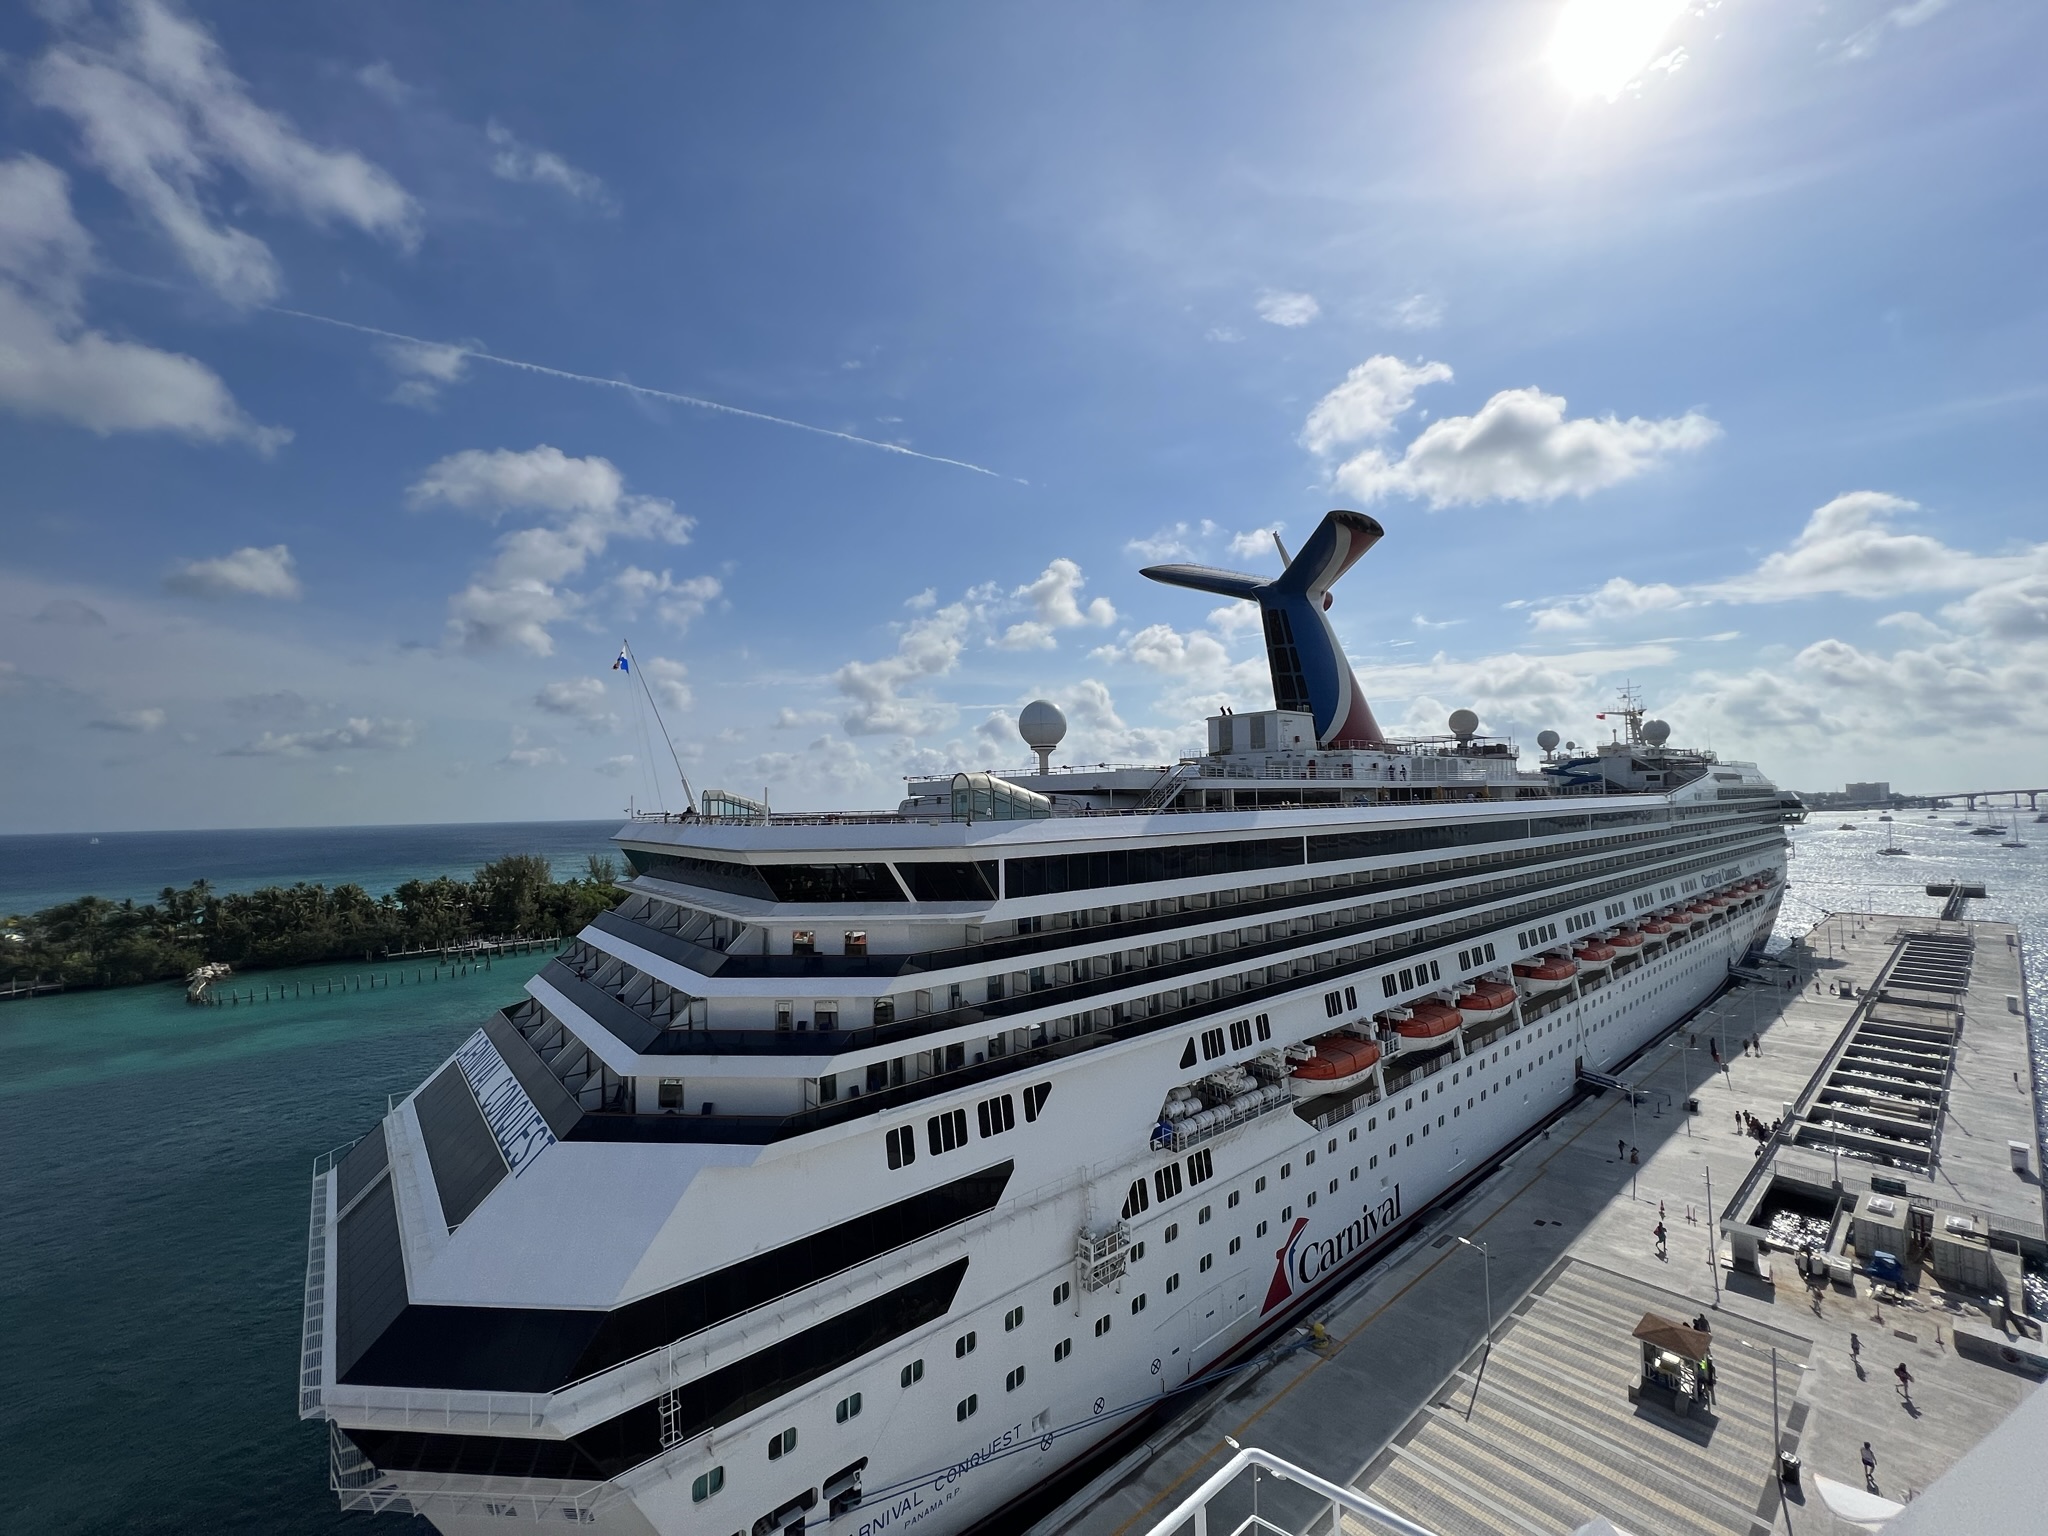 Cruise Ships – Cruise Ship Carnival Conquest Leaves the Port of Nassau Bahamas and Heads Out to Sea